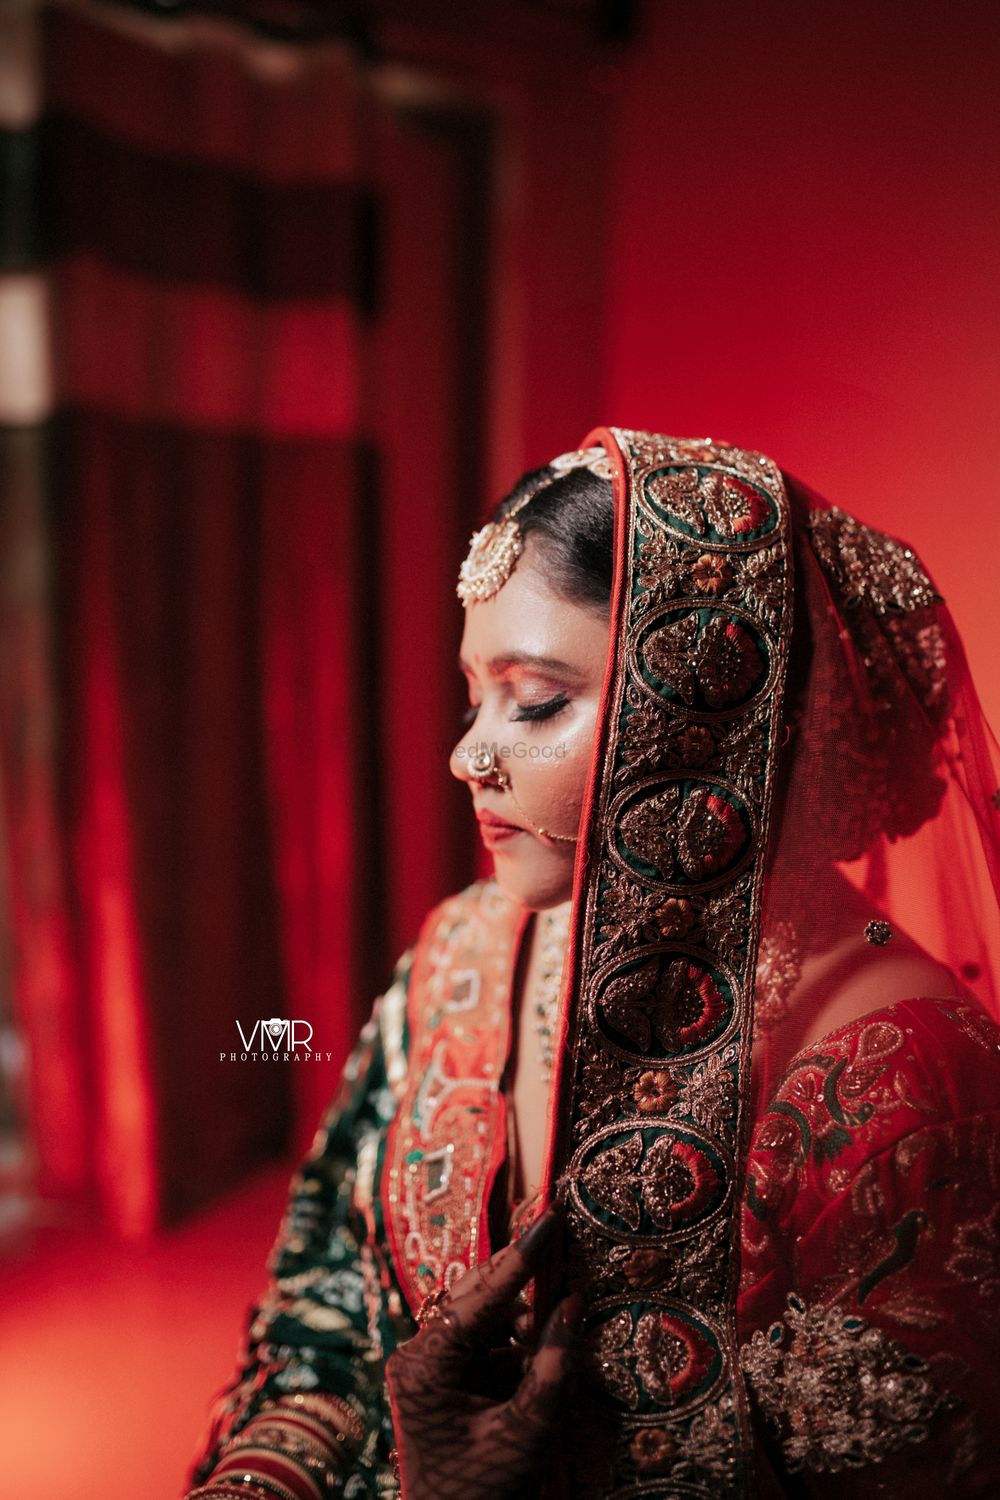 Photo From Aastha - By VMR photography